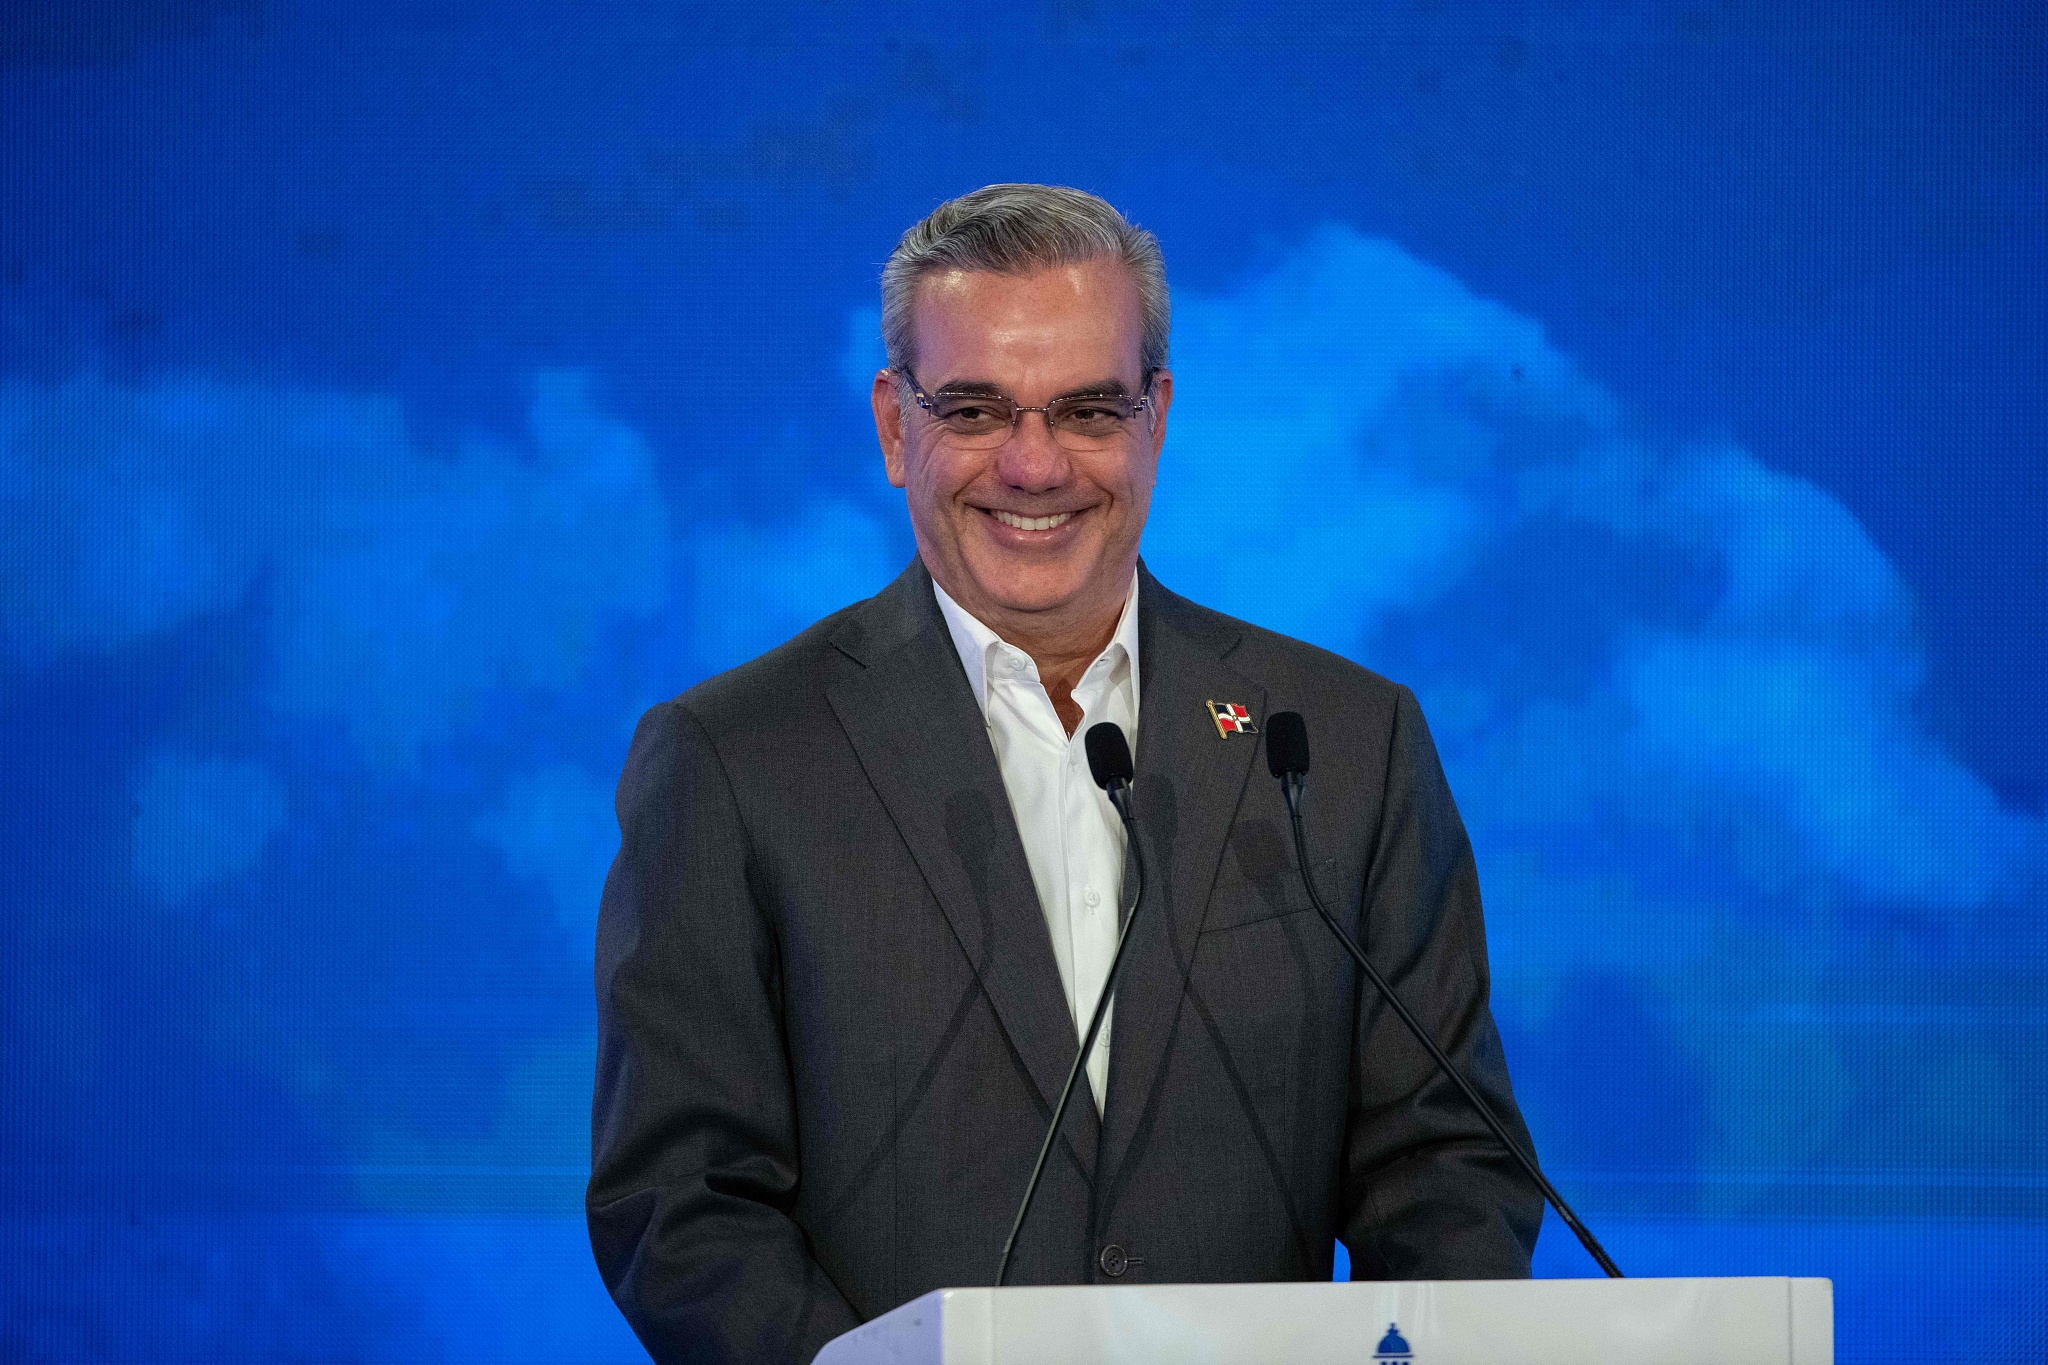 Luis Abinader, president of the Dominican Republic. /CFP